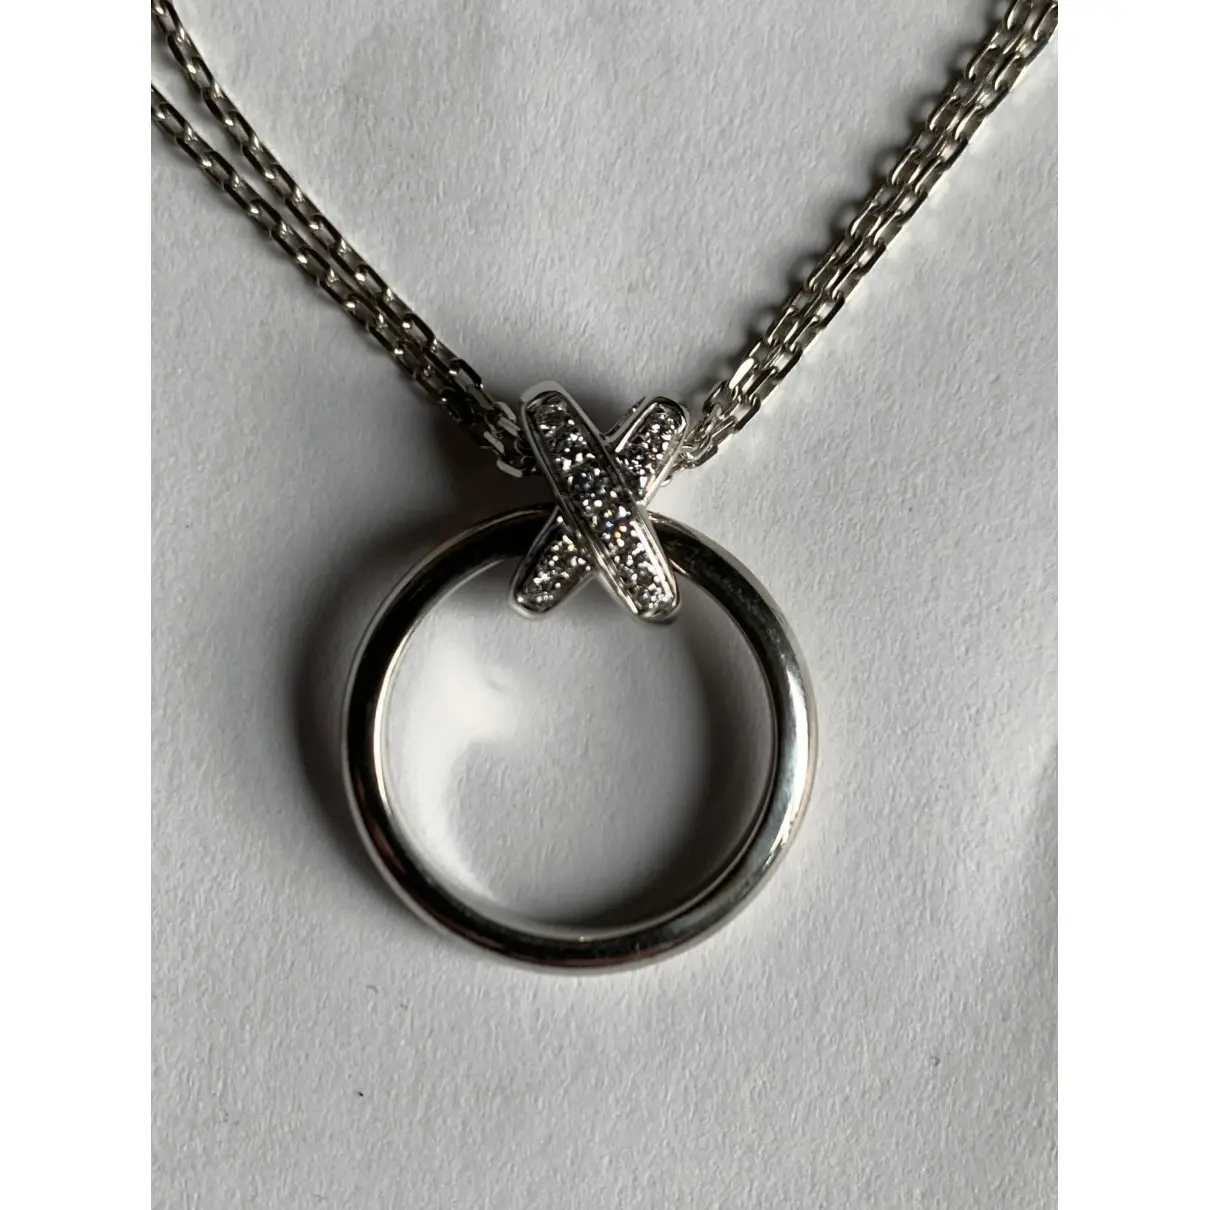 Buy Chaumet White gold necklace online